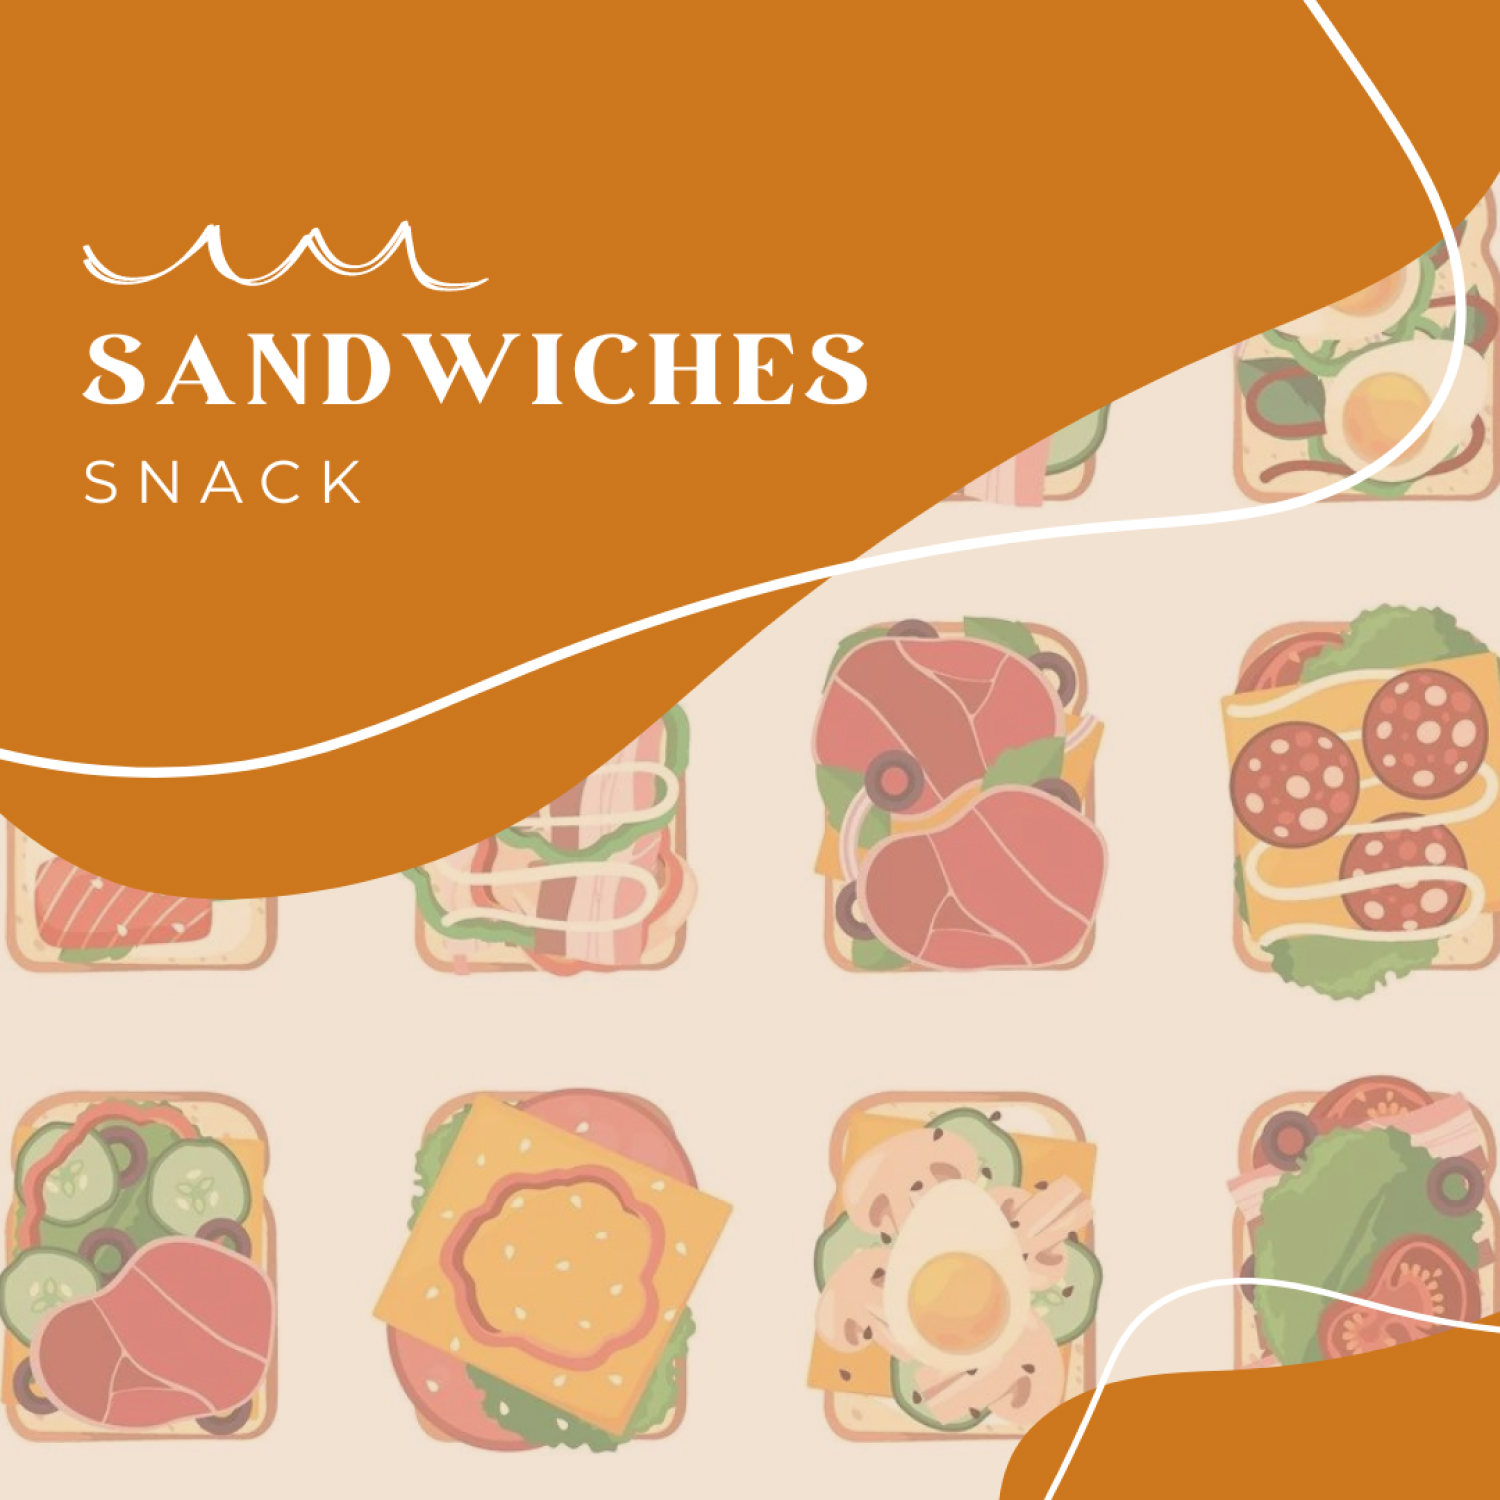 Prints of sandwiches snack.